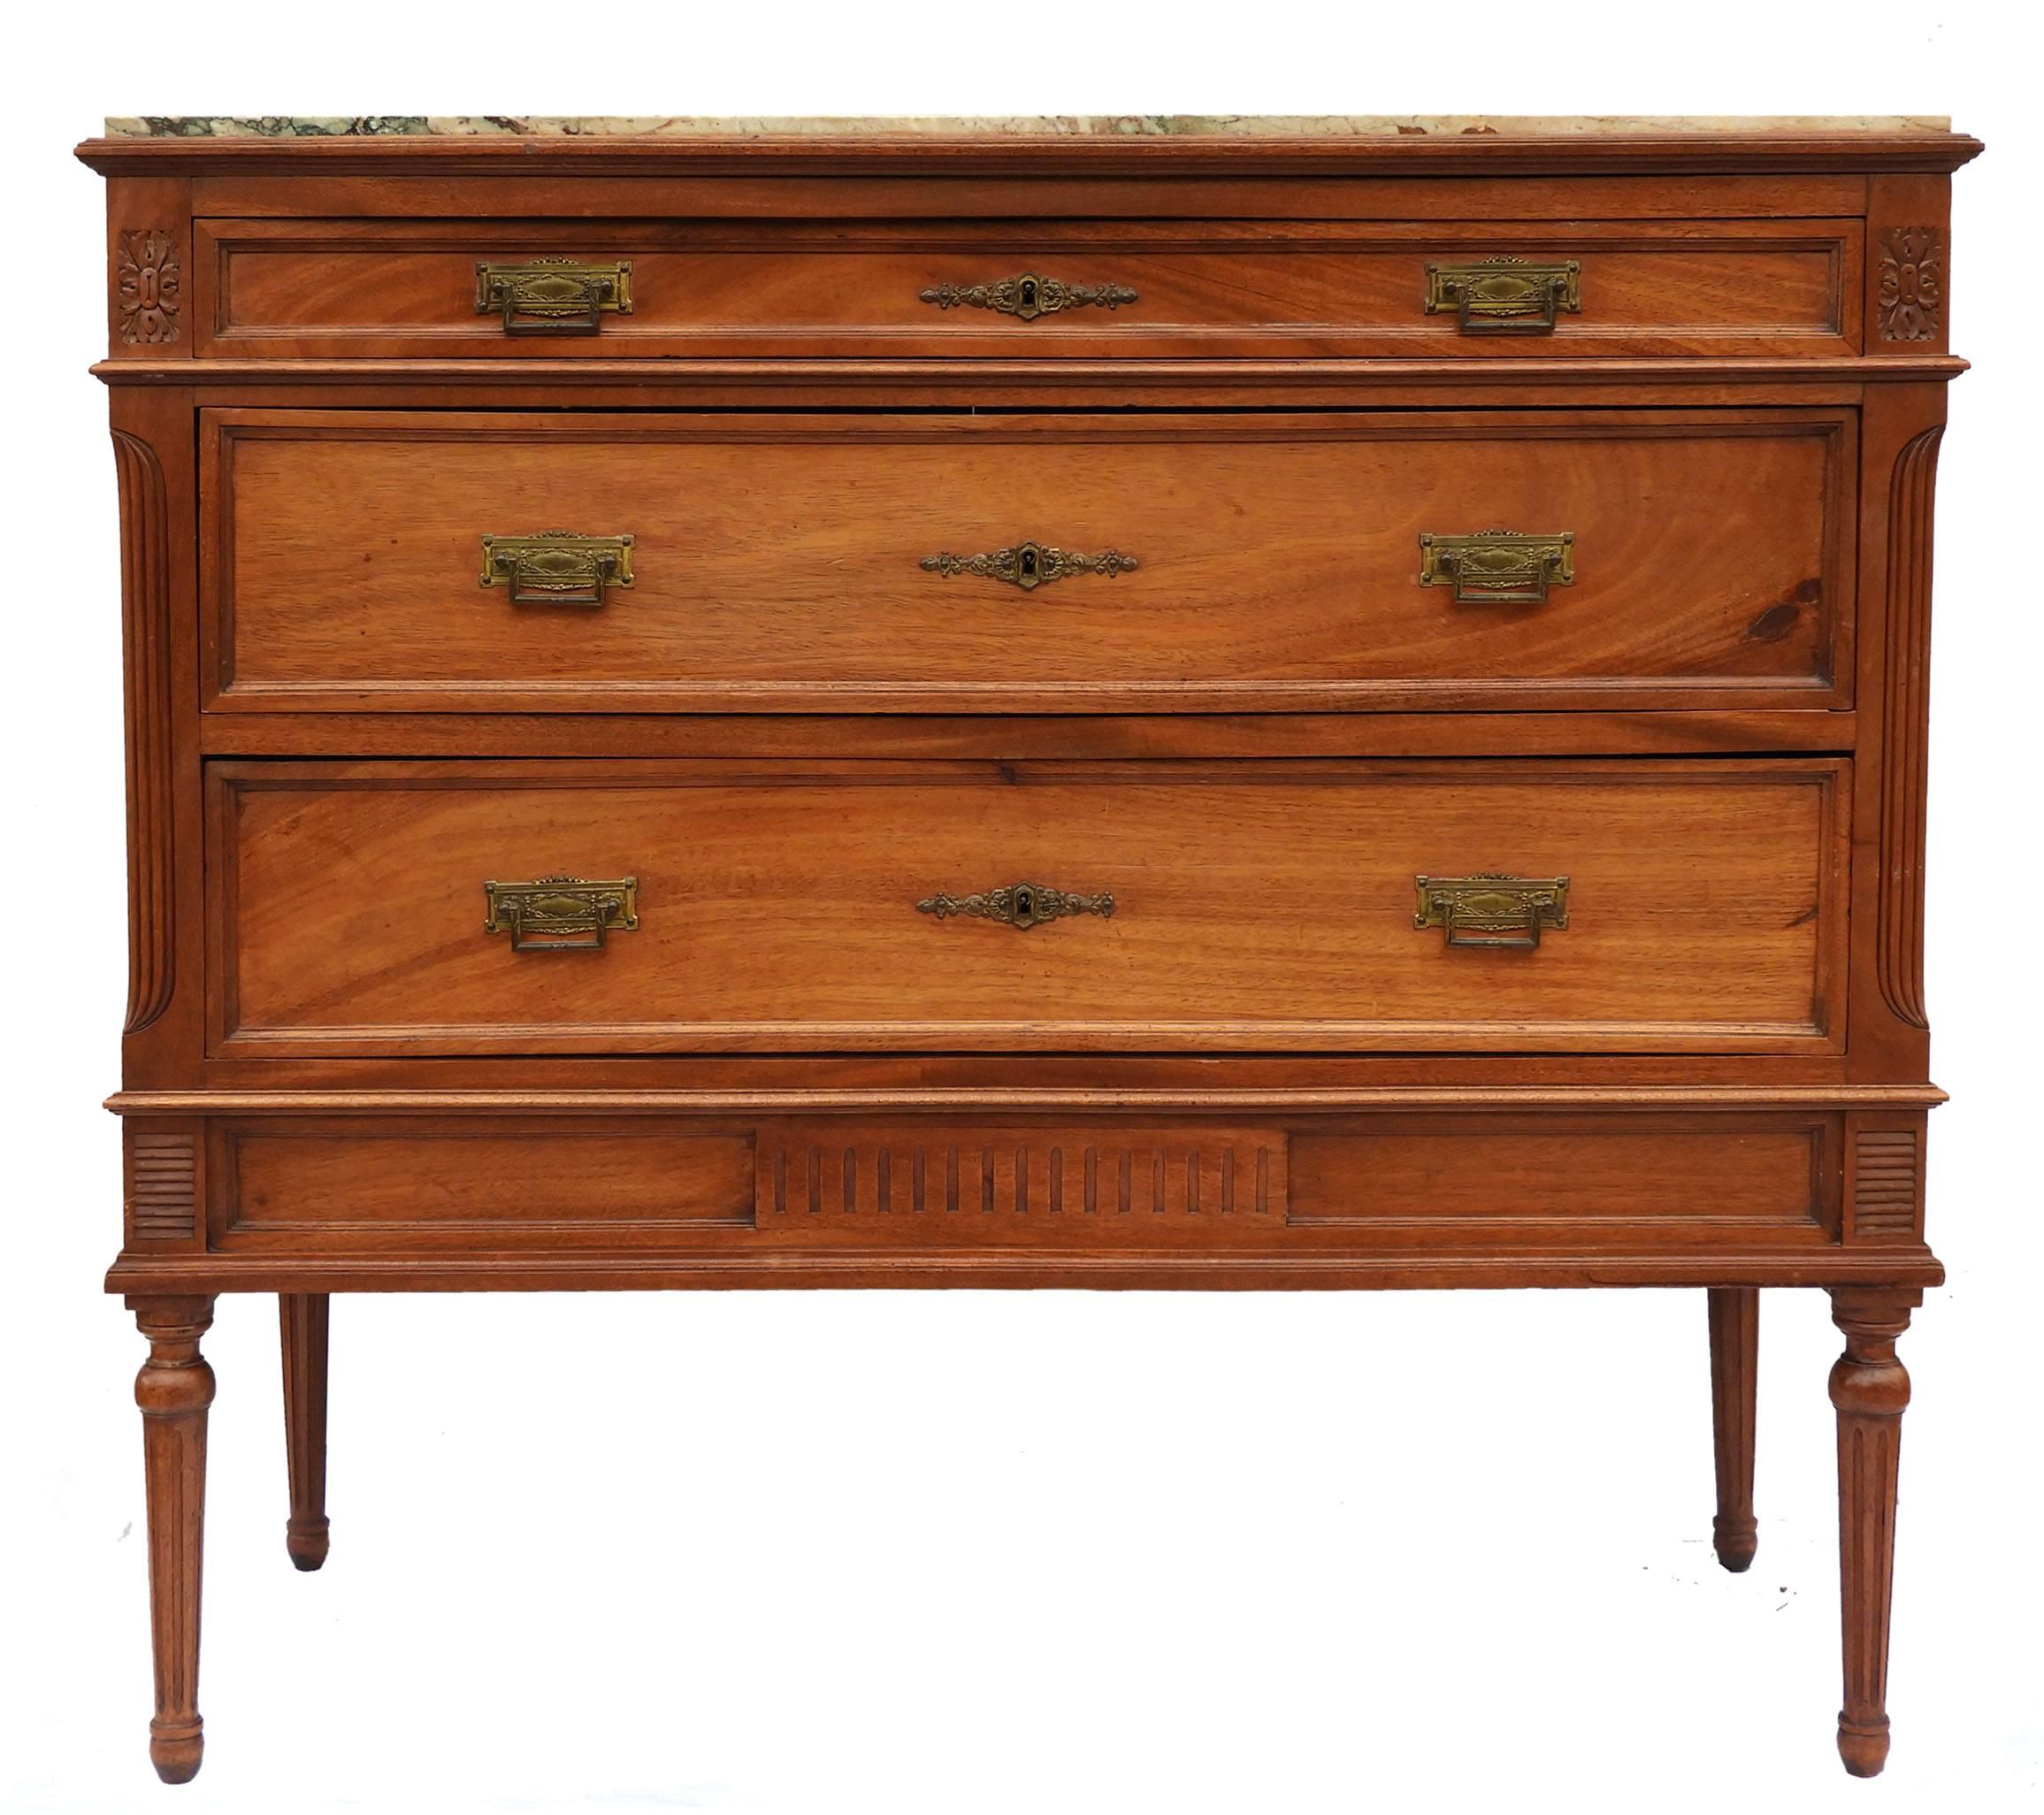 French commode chest of drawers Louis XVI style marble early 20th century
Verigated marble top
Walnut
Three drawers with original ormolu handles
In very good vintage condition with lovely patina one very well done old repair to a back leg, sound